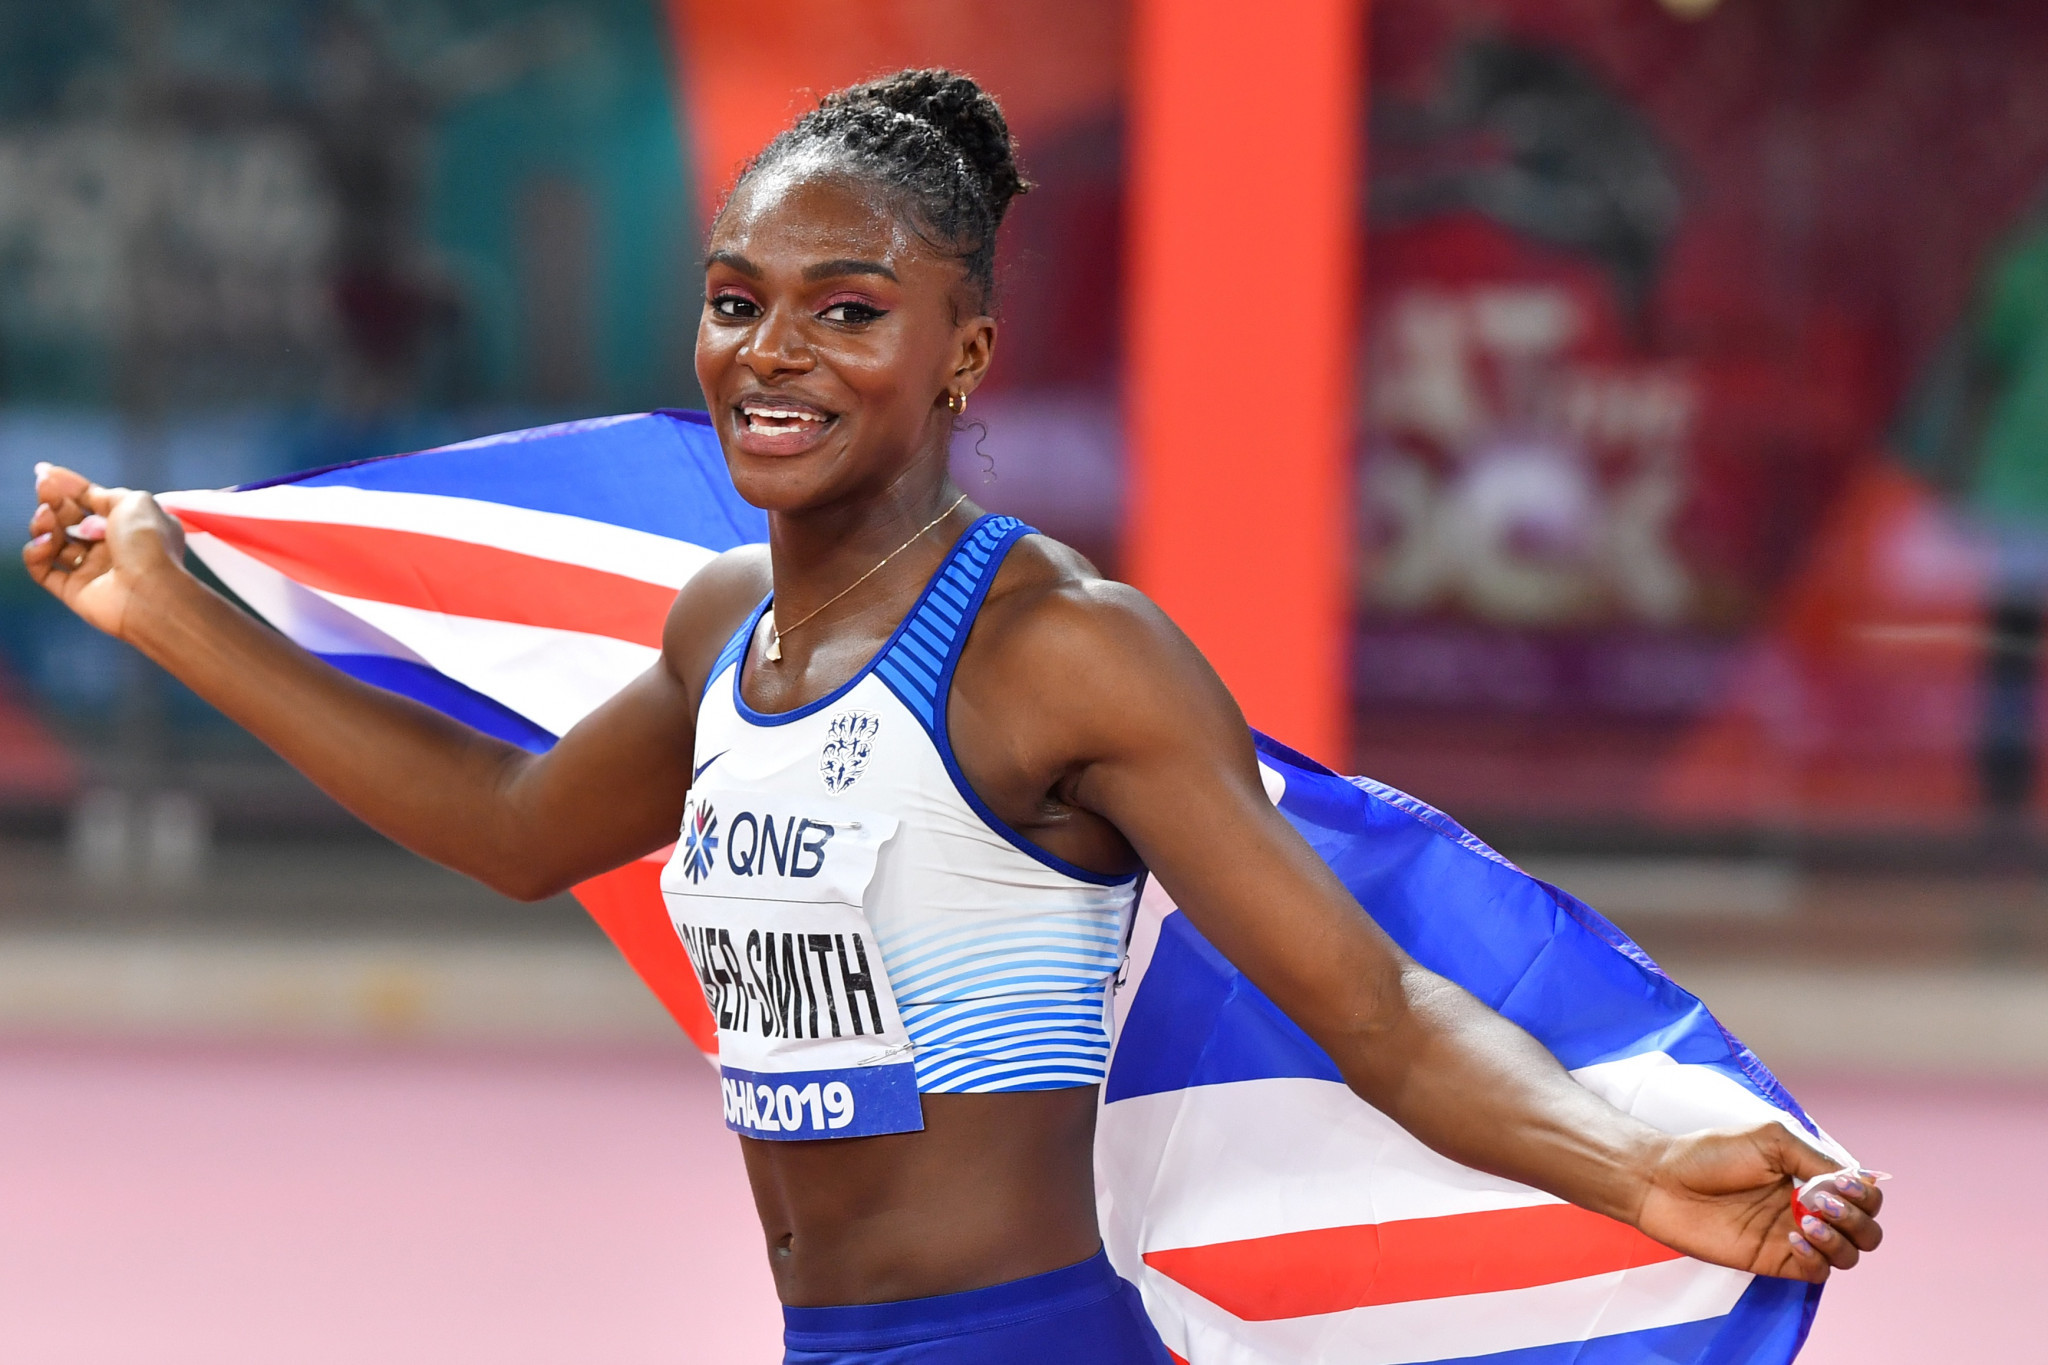 Dina Asher-Smith became the first British woman to earn a world sprint title after triumphing in the 200m at the IAAF World Championships in Doha with a commanding performance ©Getty Images